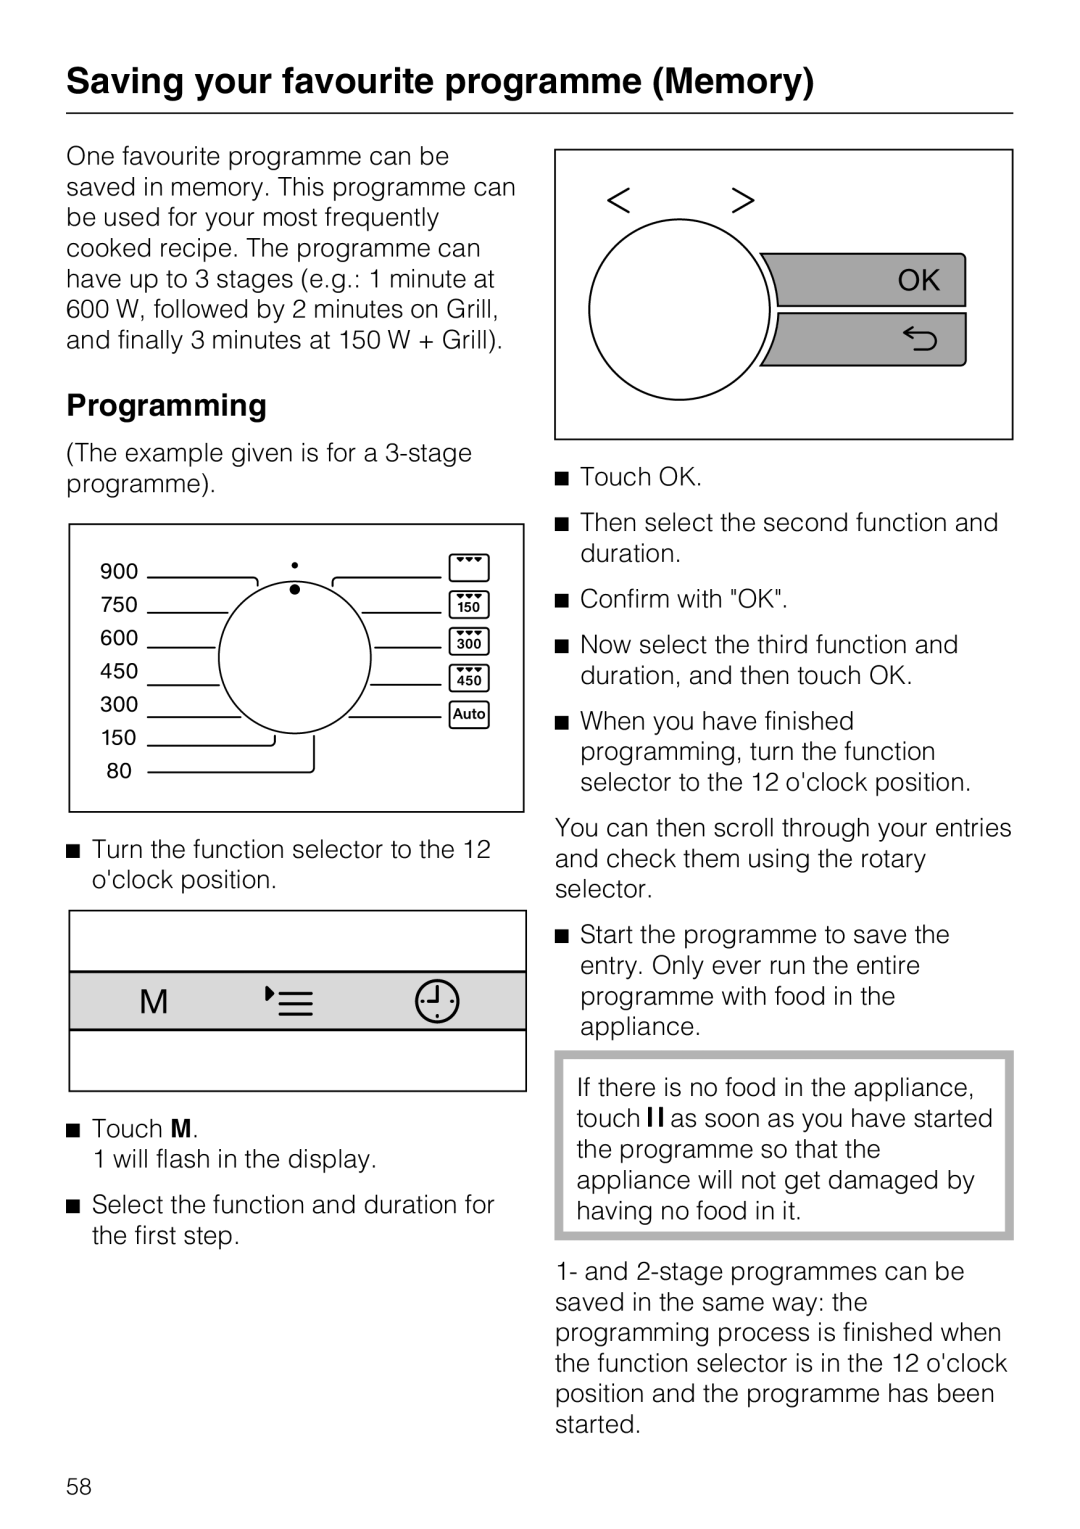 Miele 09 919 100 operating instructions Saving your favourite programme Memory, Programming 